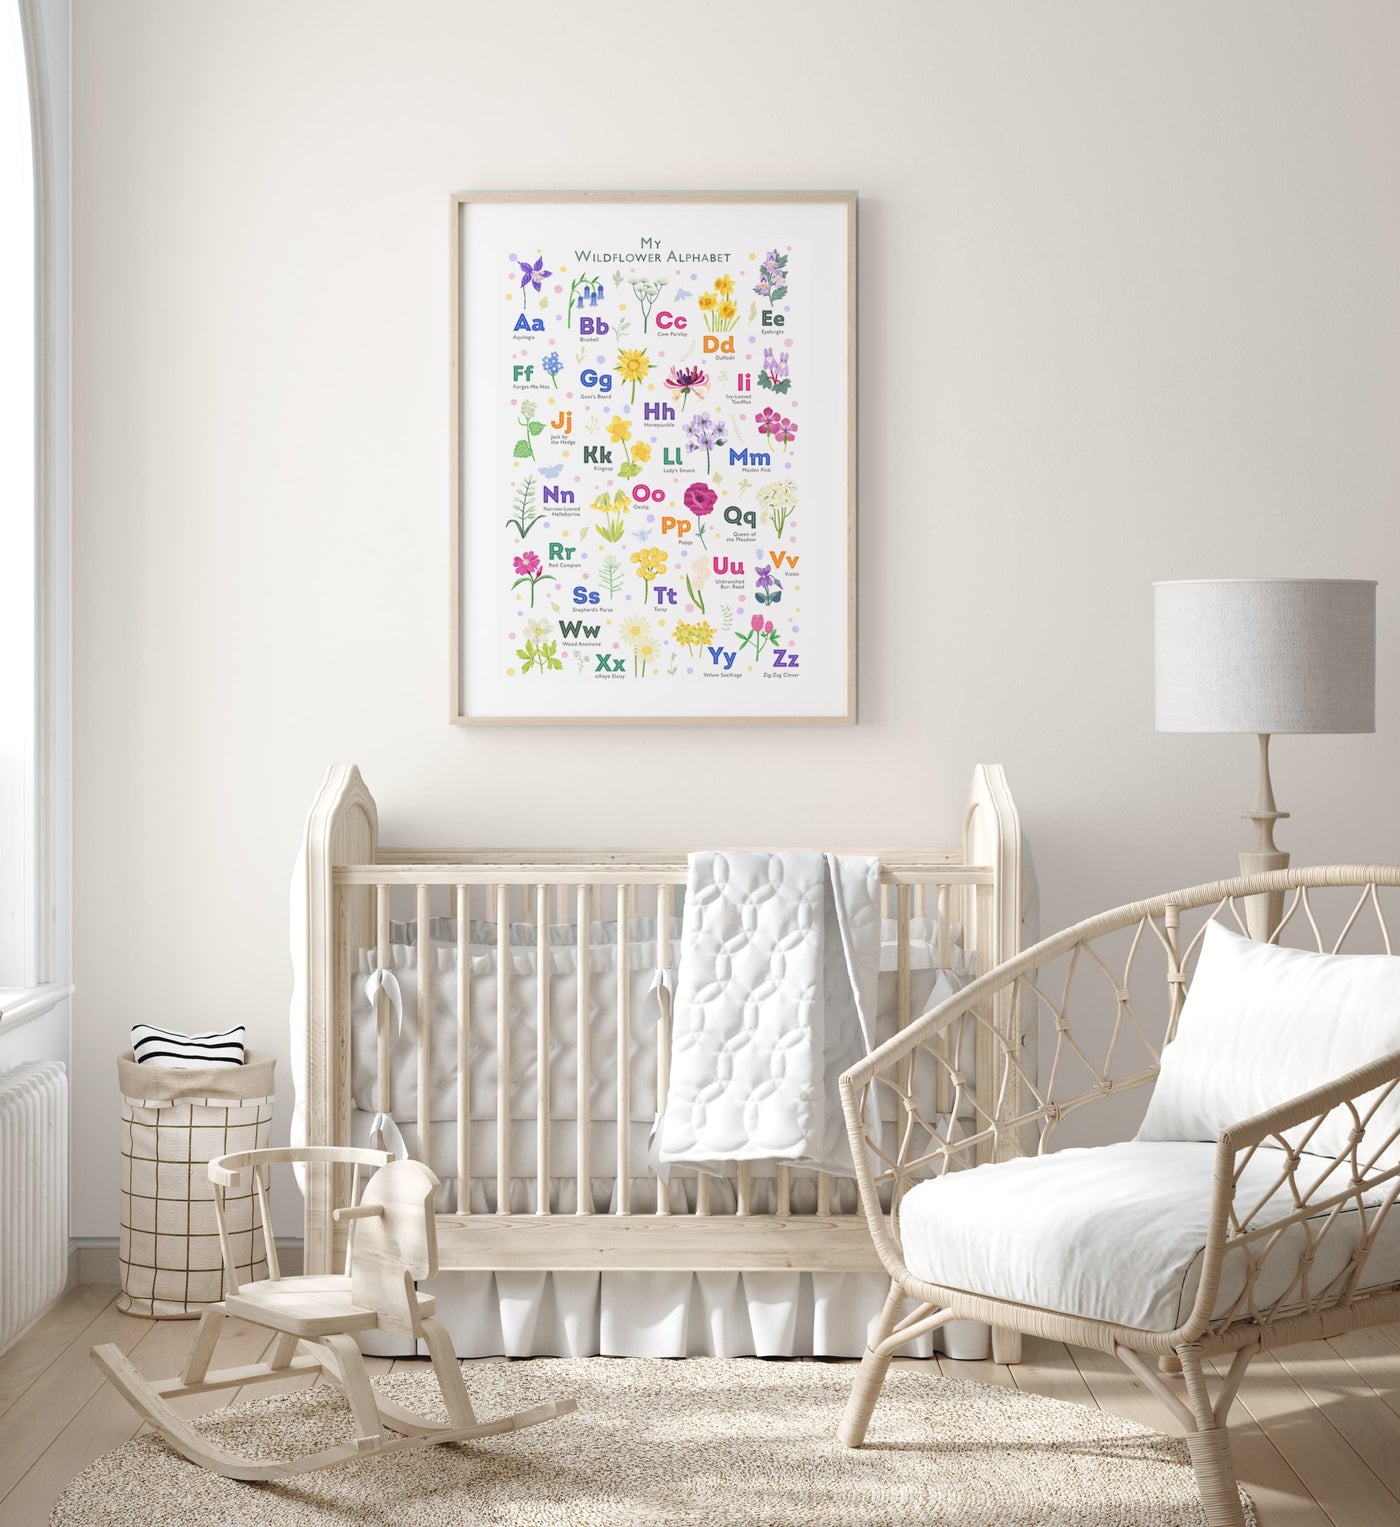 Image of a framed personalized wildflower alphabet print hanging on a light colored wall above a crib